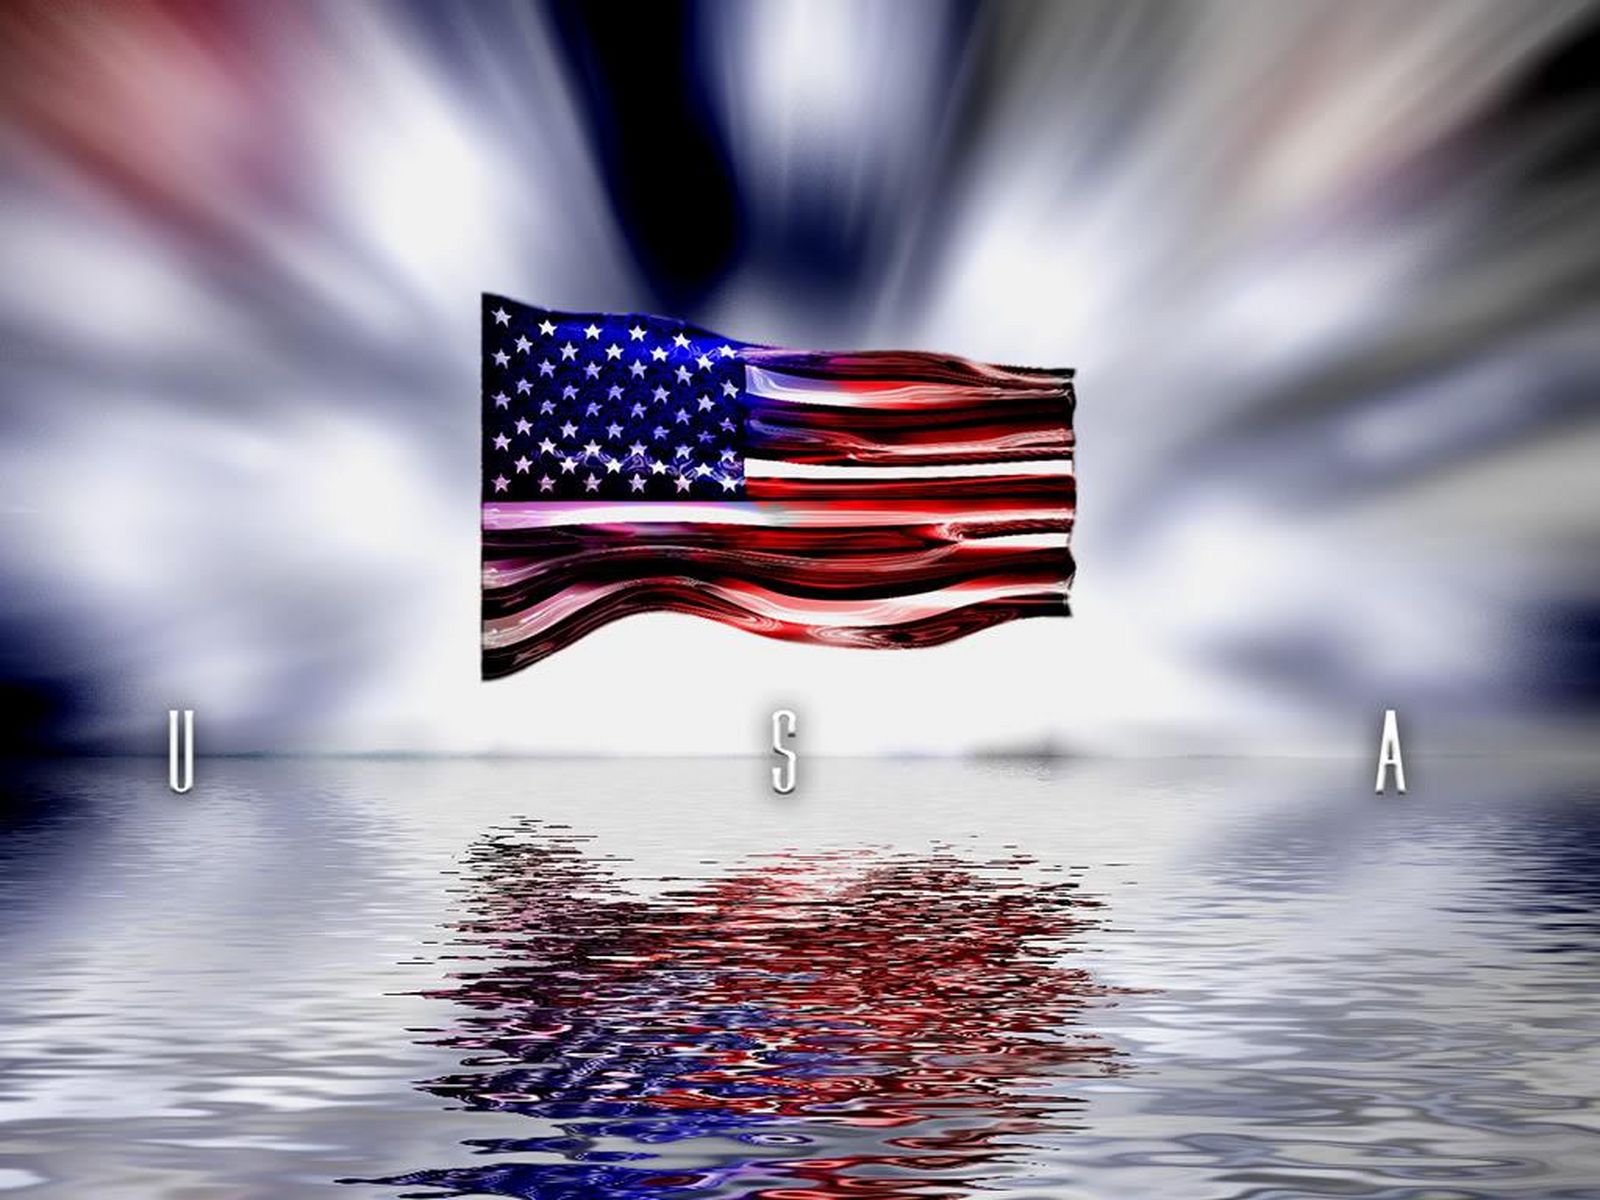  American flag wallpapers download latest wallpapers free background